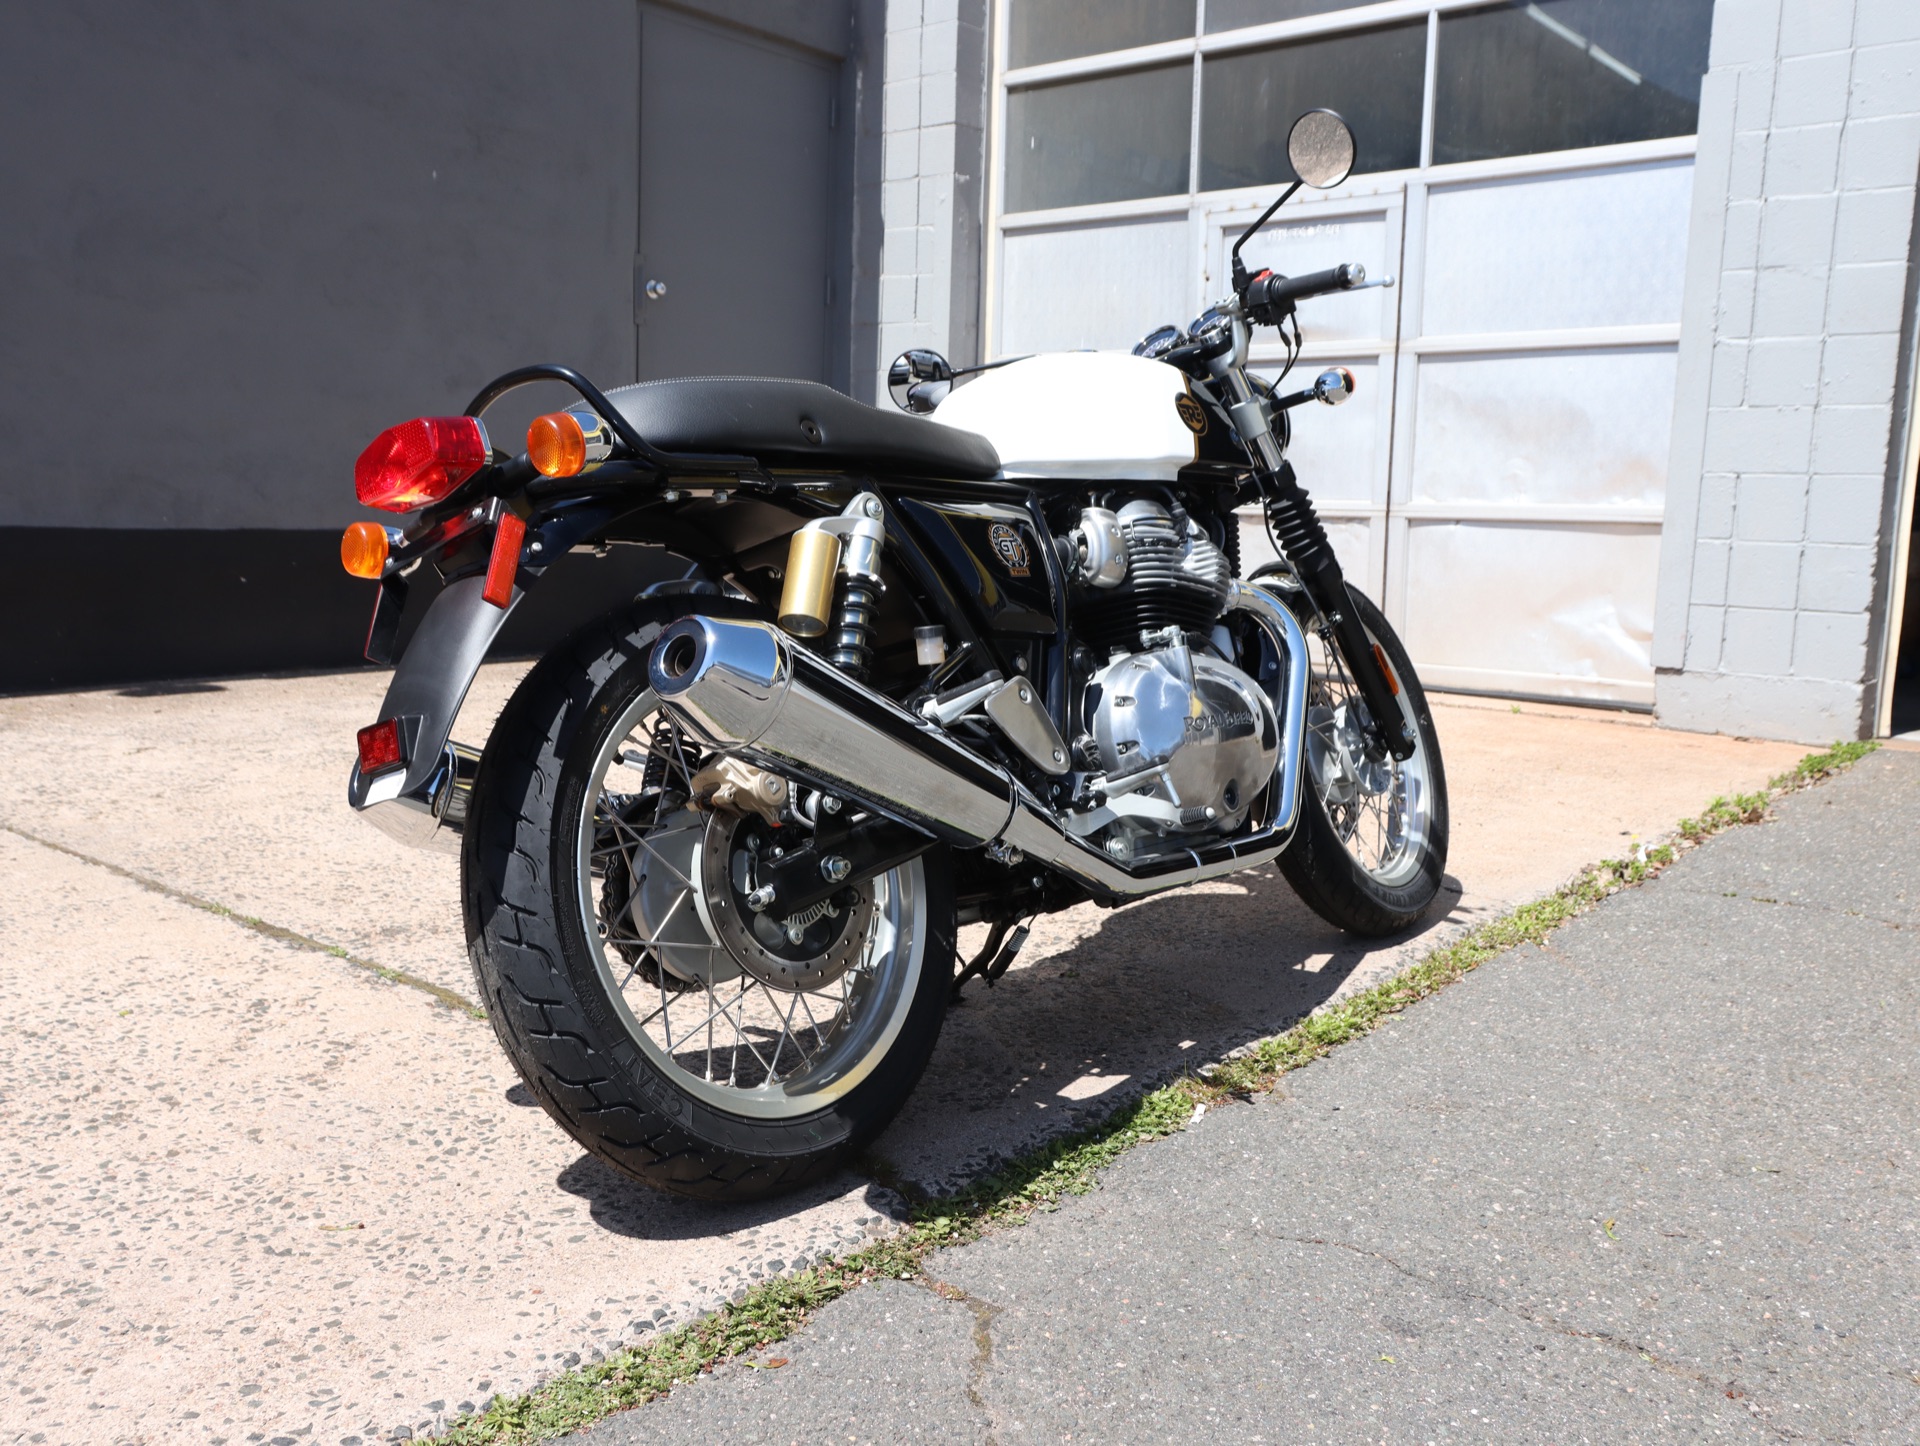 2022 Royal Enfield Continental GT 650 in Enfield, Connecticut - Photo 3